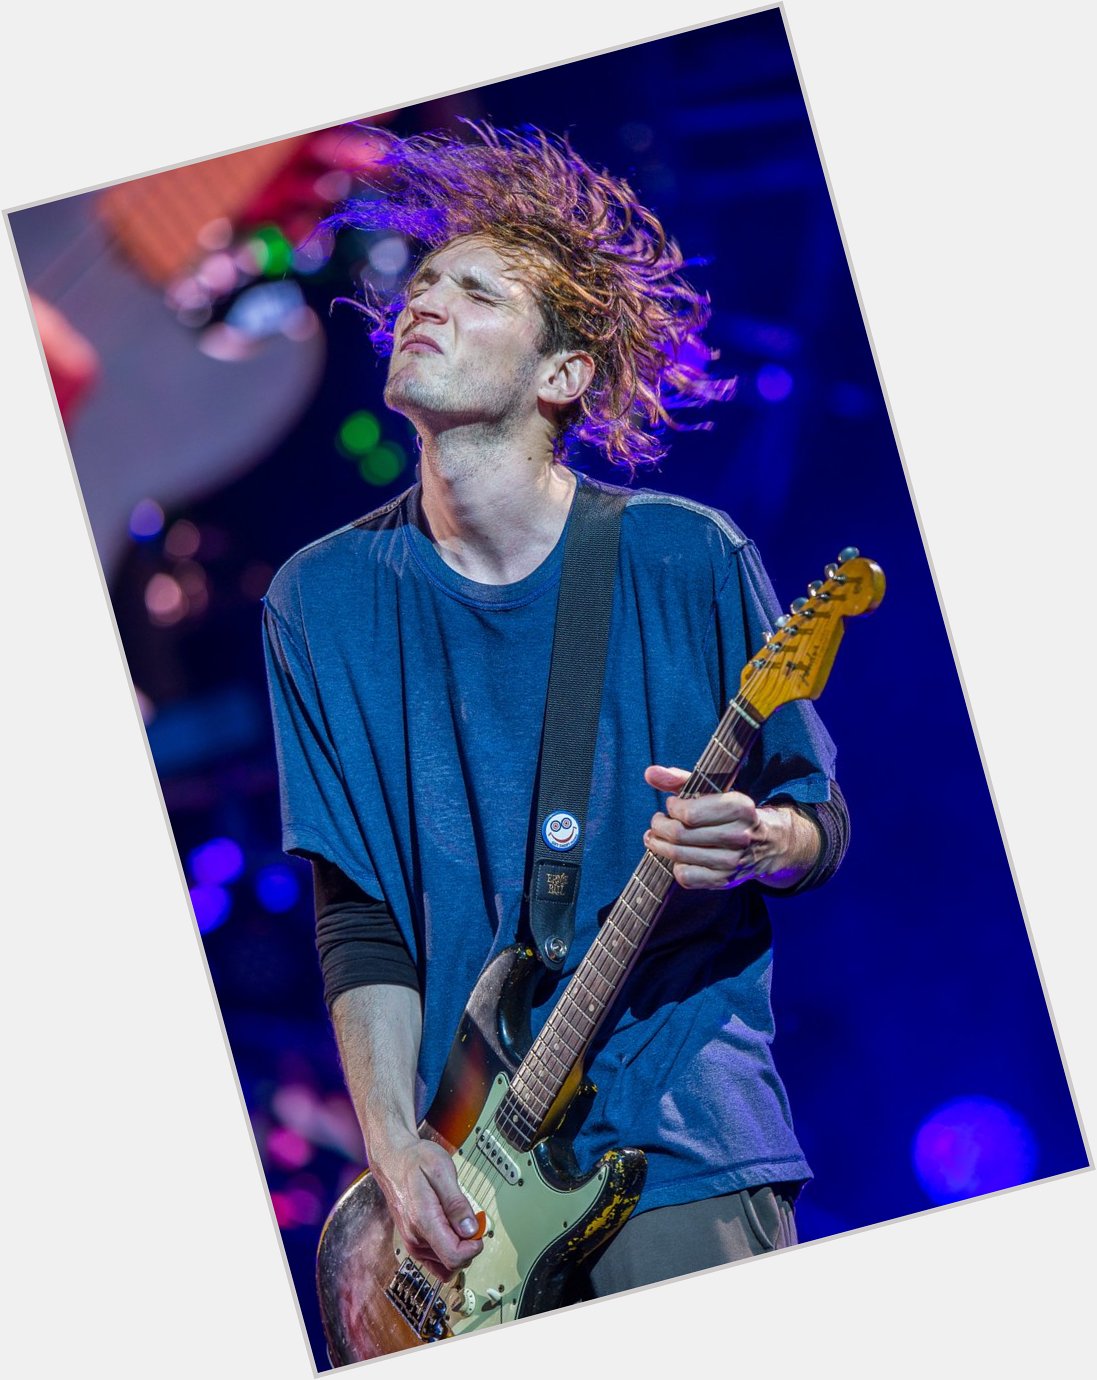 Happy birthday to Josh Klinghoffer of Red Hot Chili Peppers,
(October 3, 1979). 